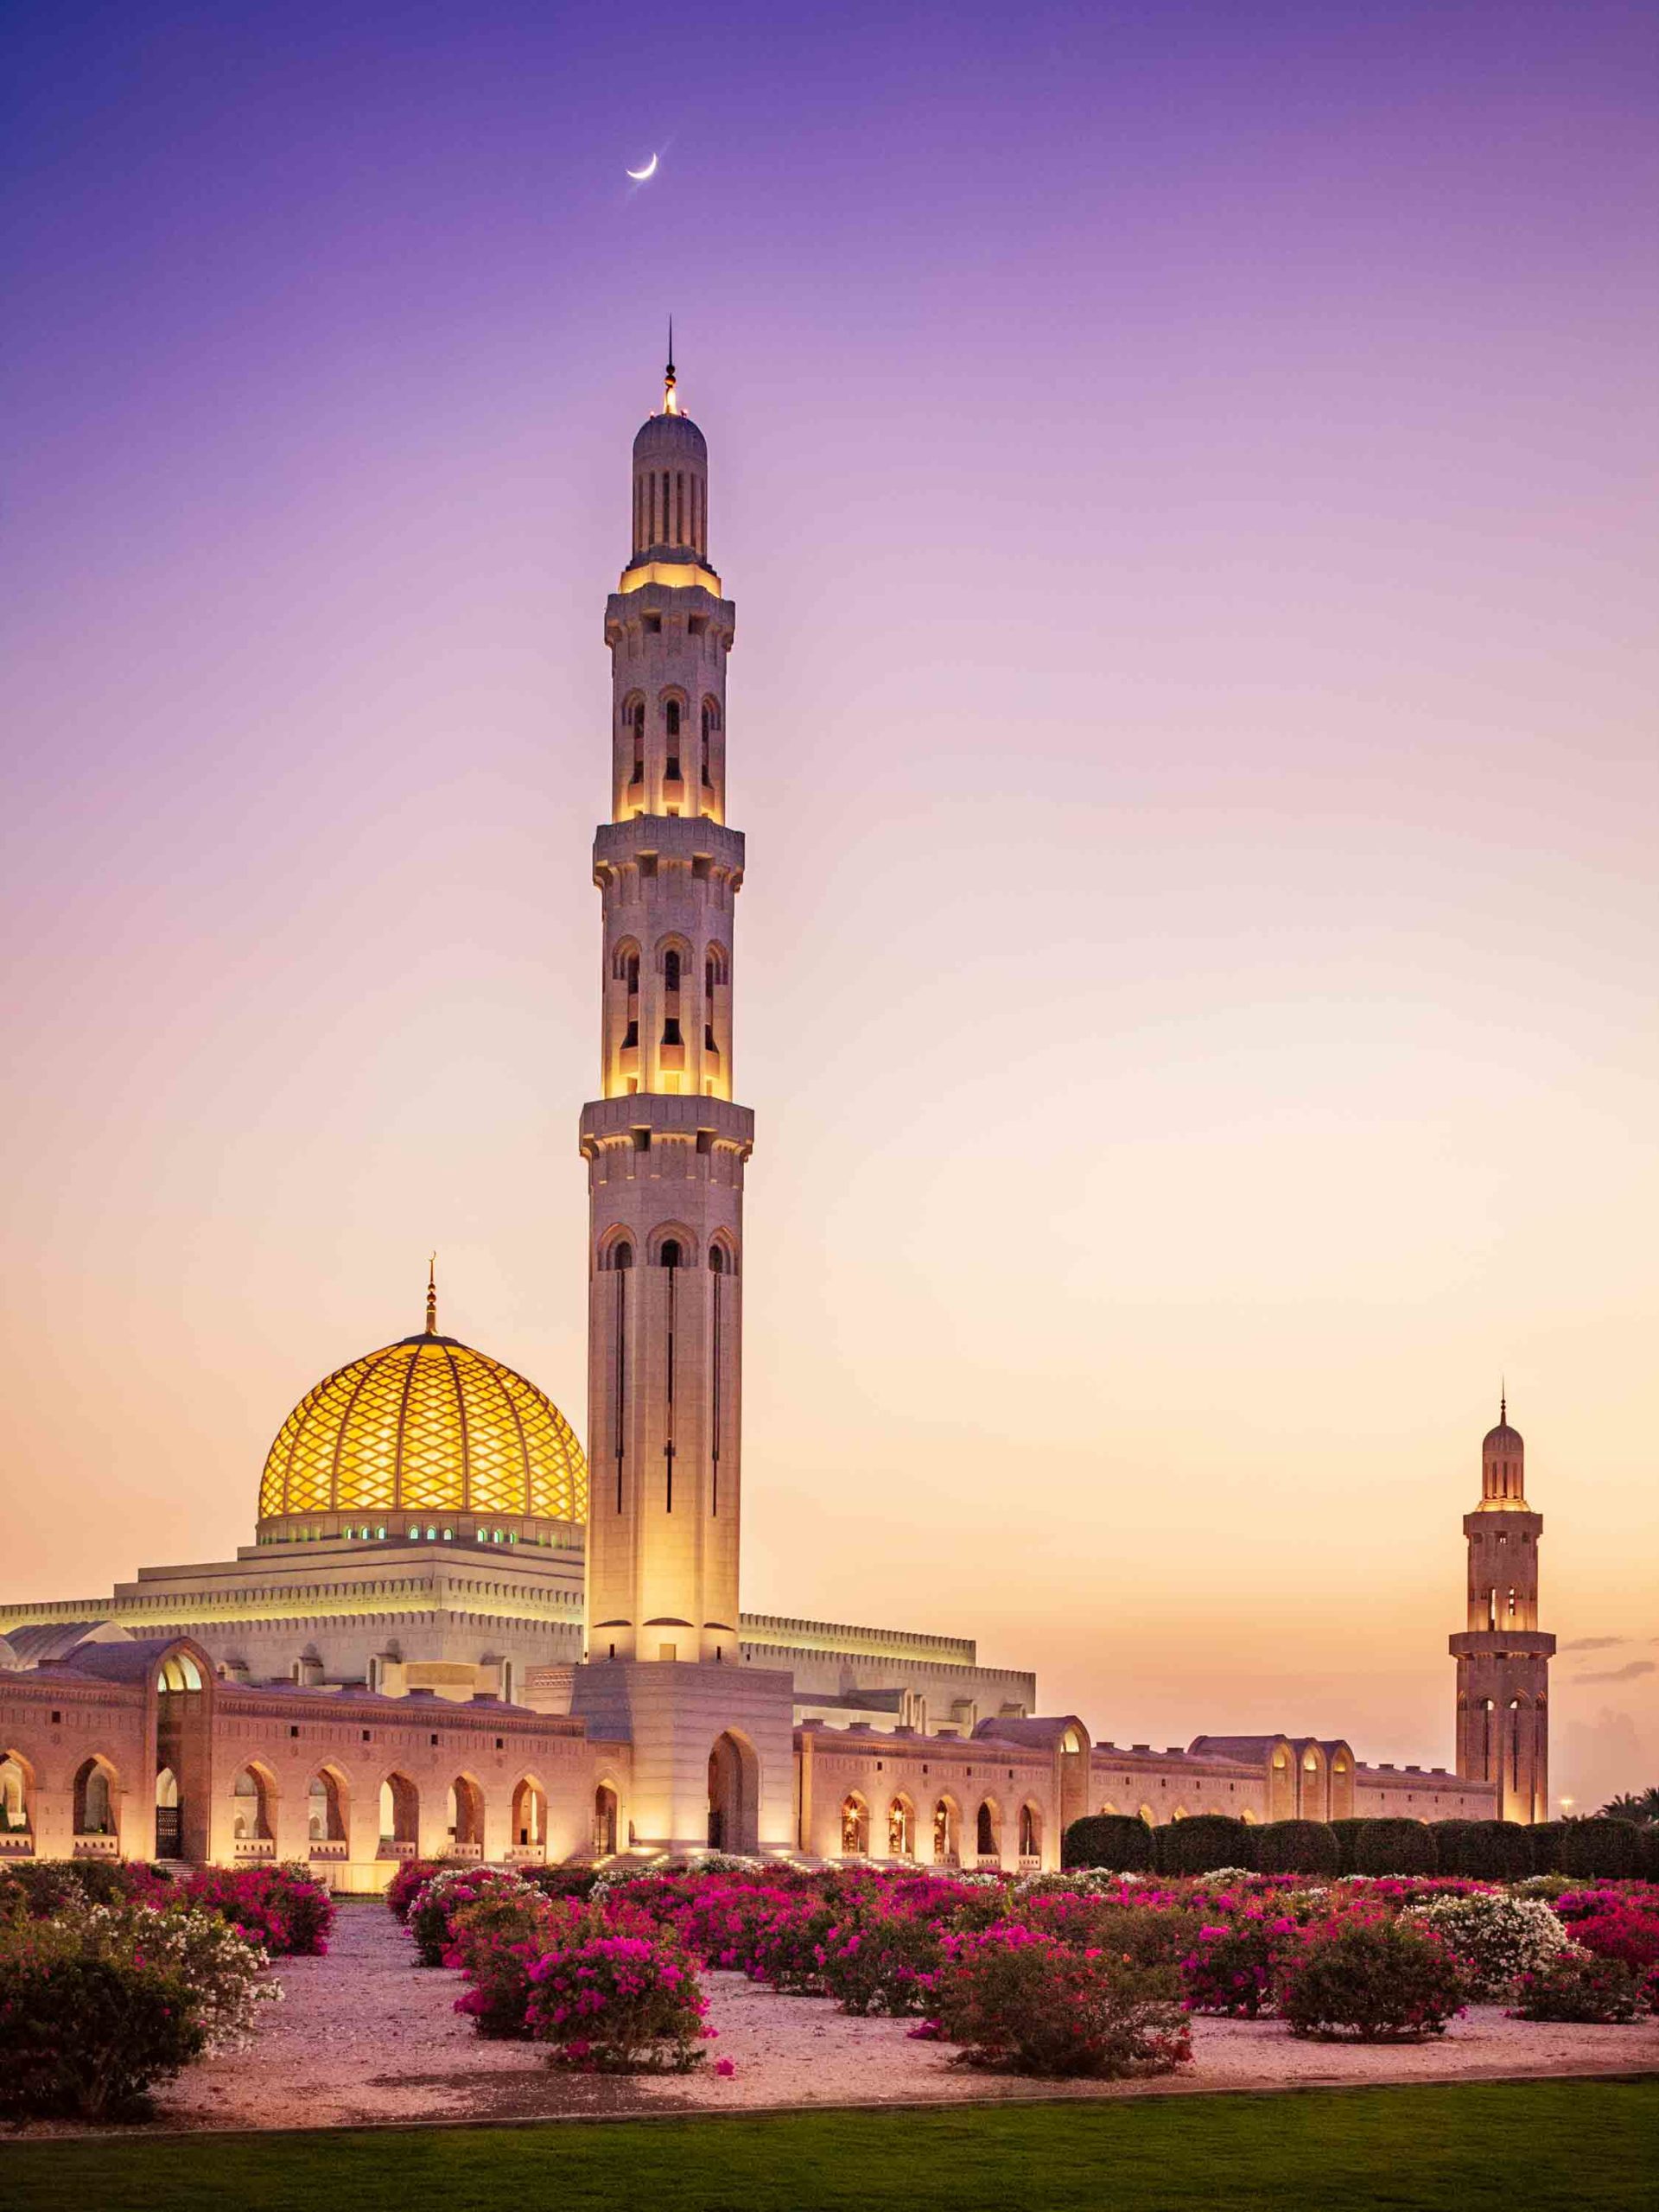 Sultan Qaboos Grand Mosque Wallpapers